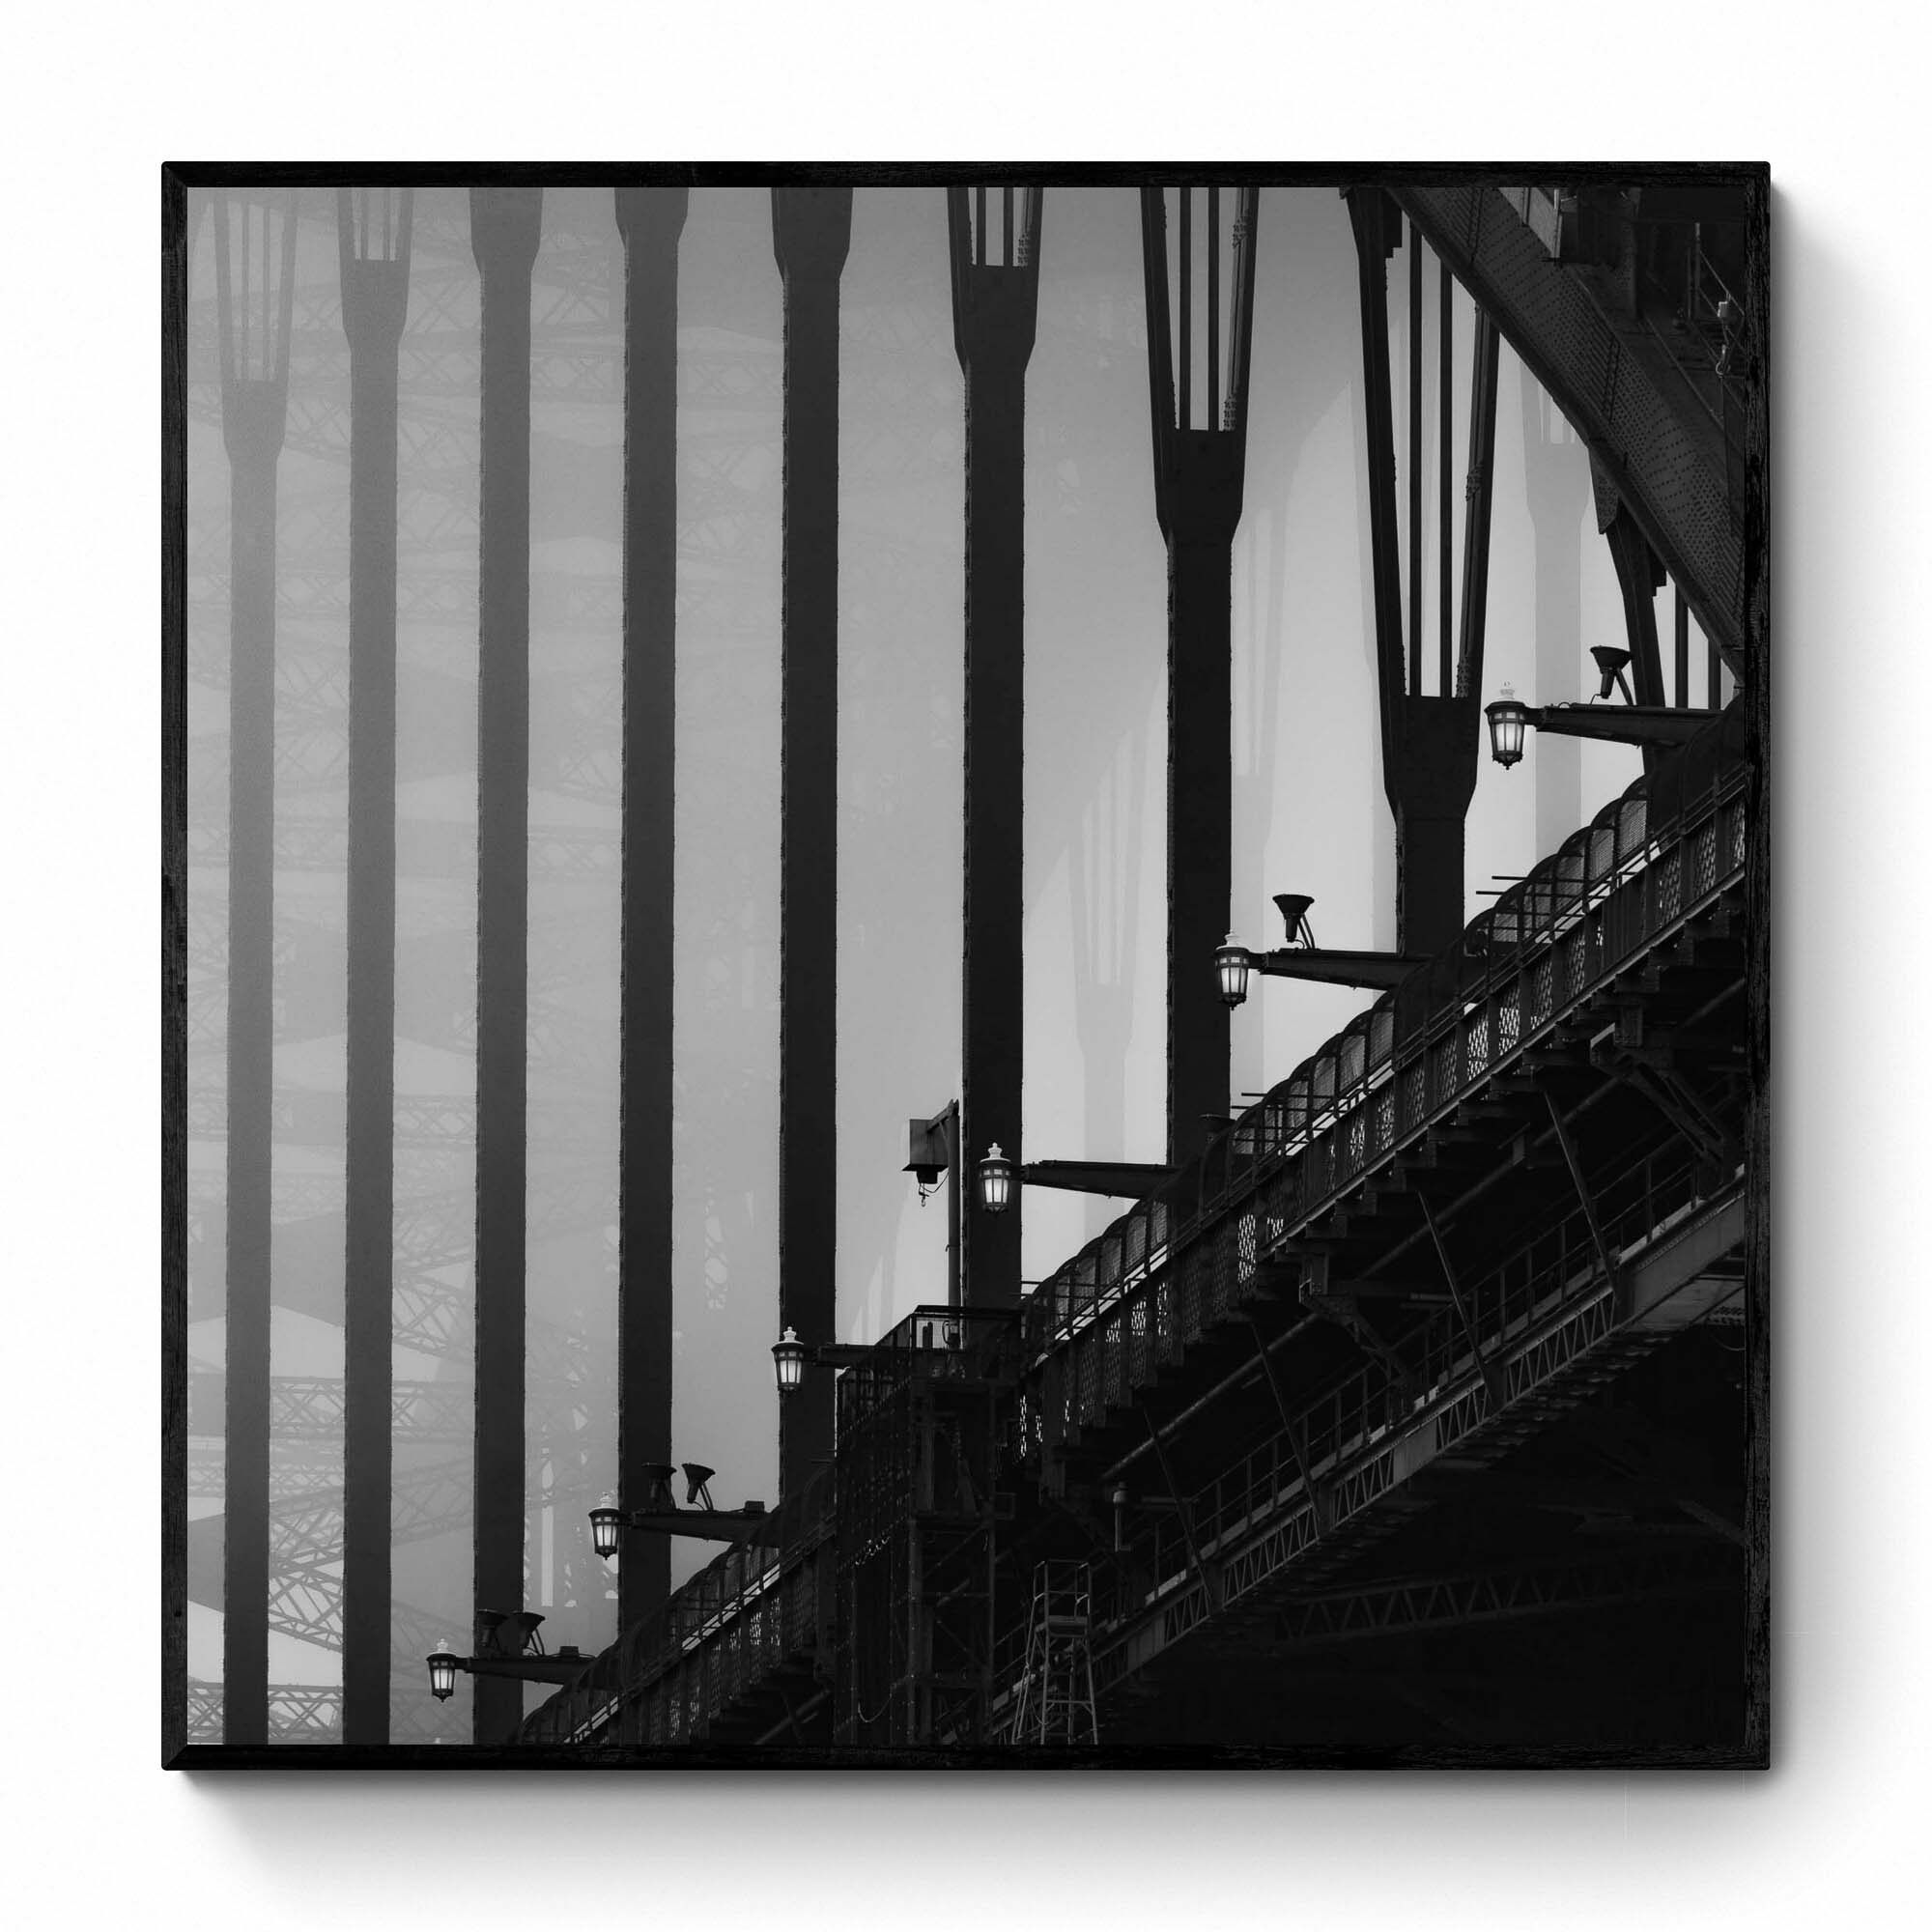 Monochrome image of Sydney Harbour Bridge, showing the contrast of the stark, strong lines of its arches and street lamps against the light sky.